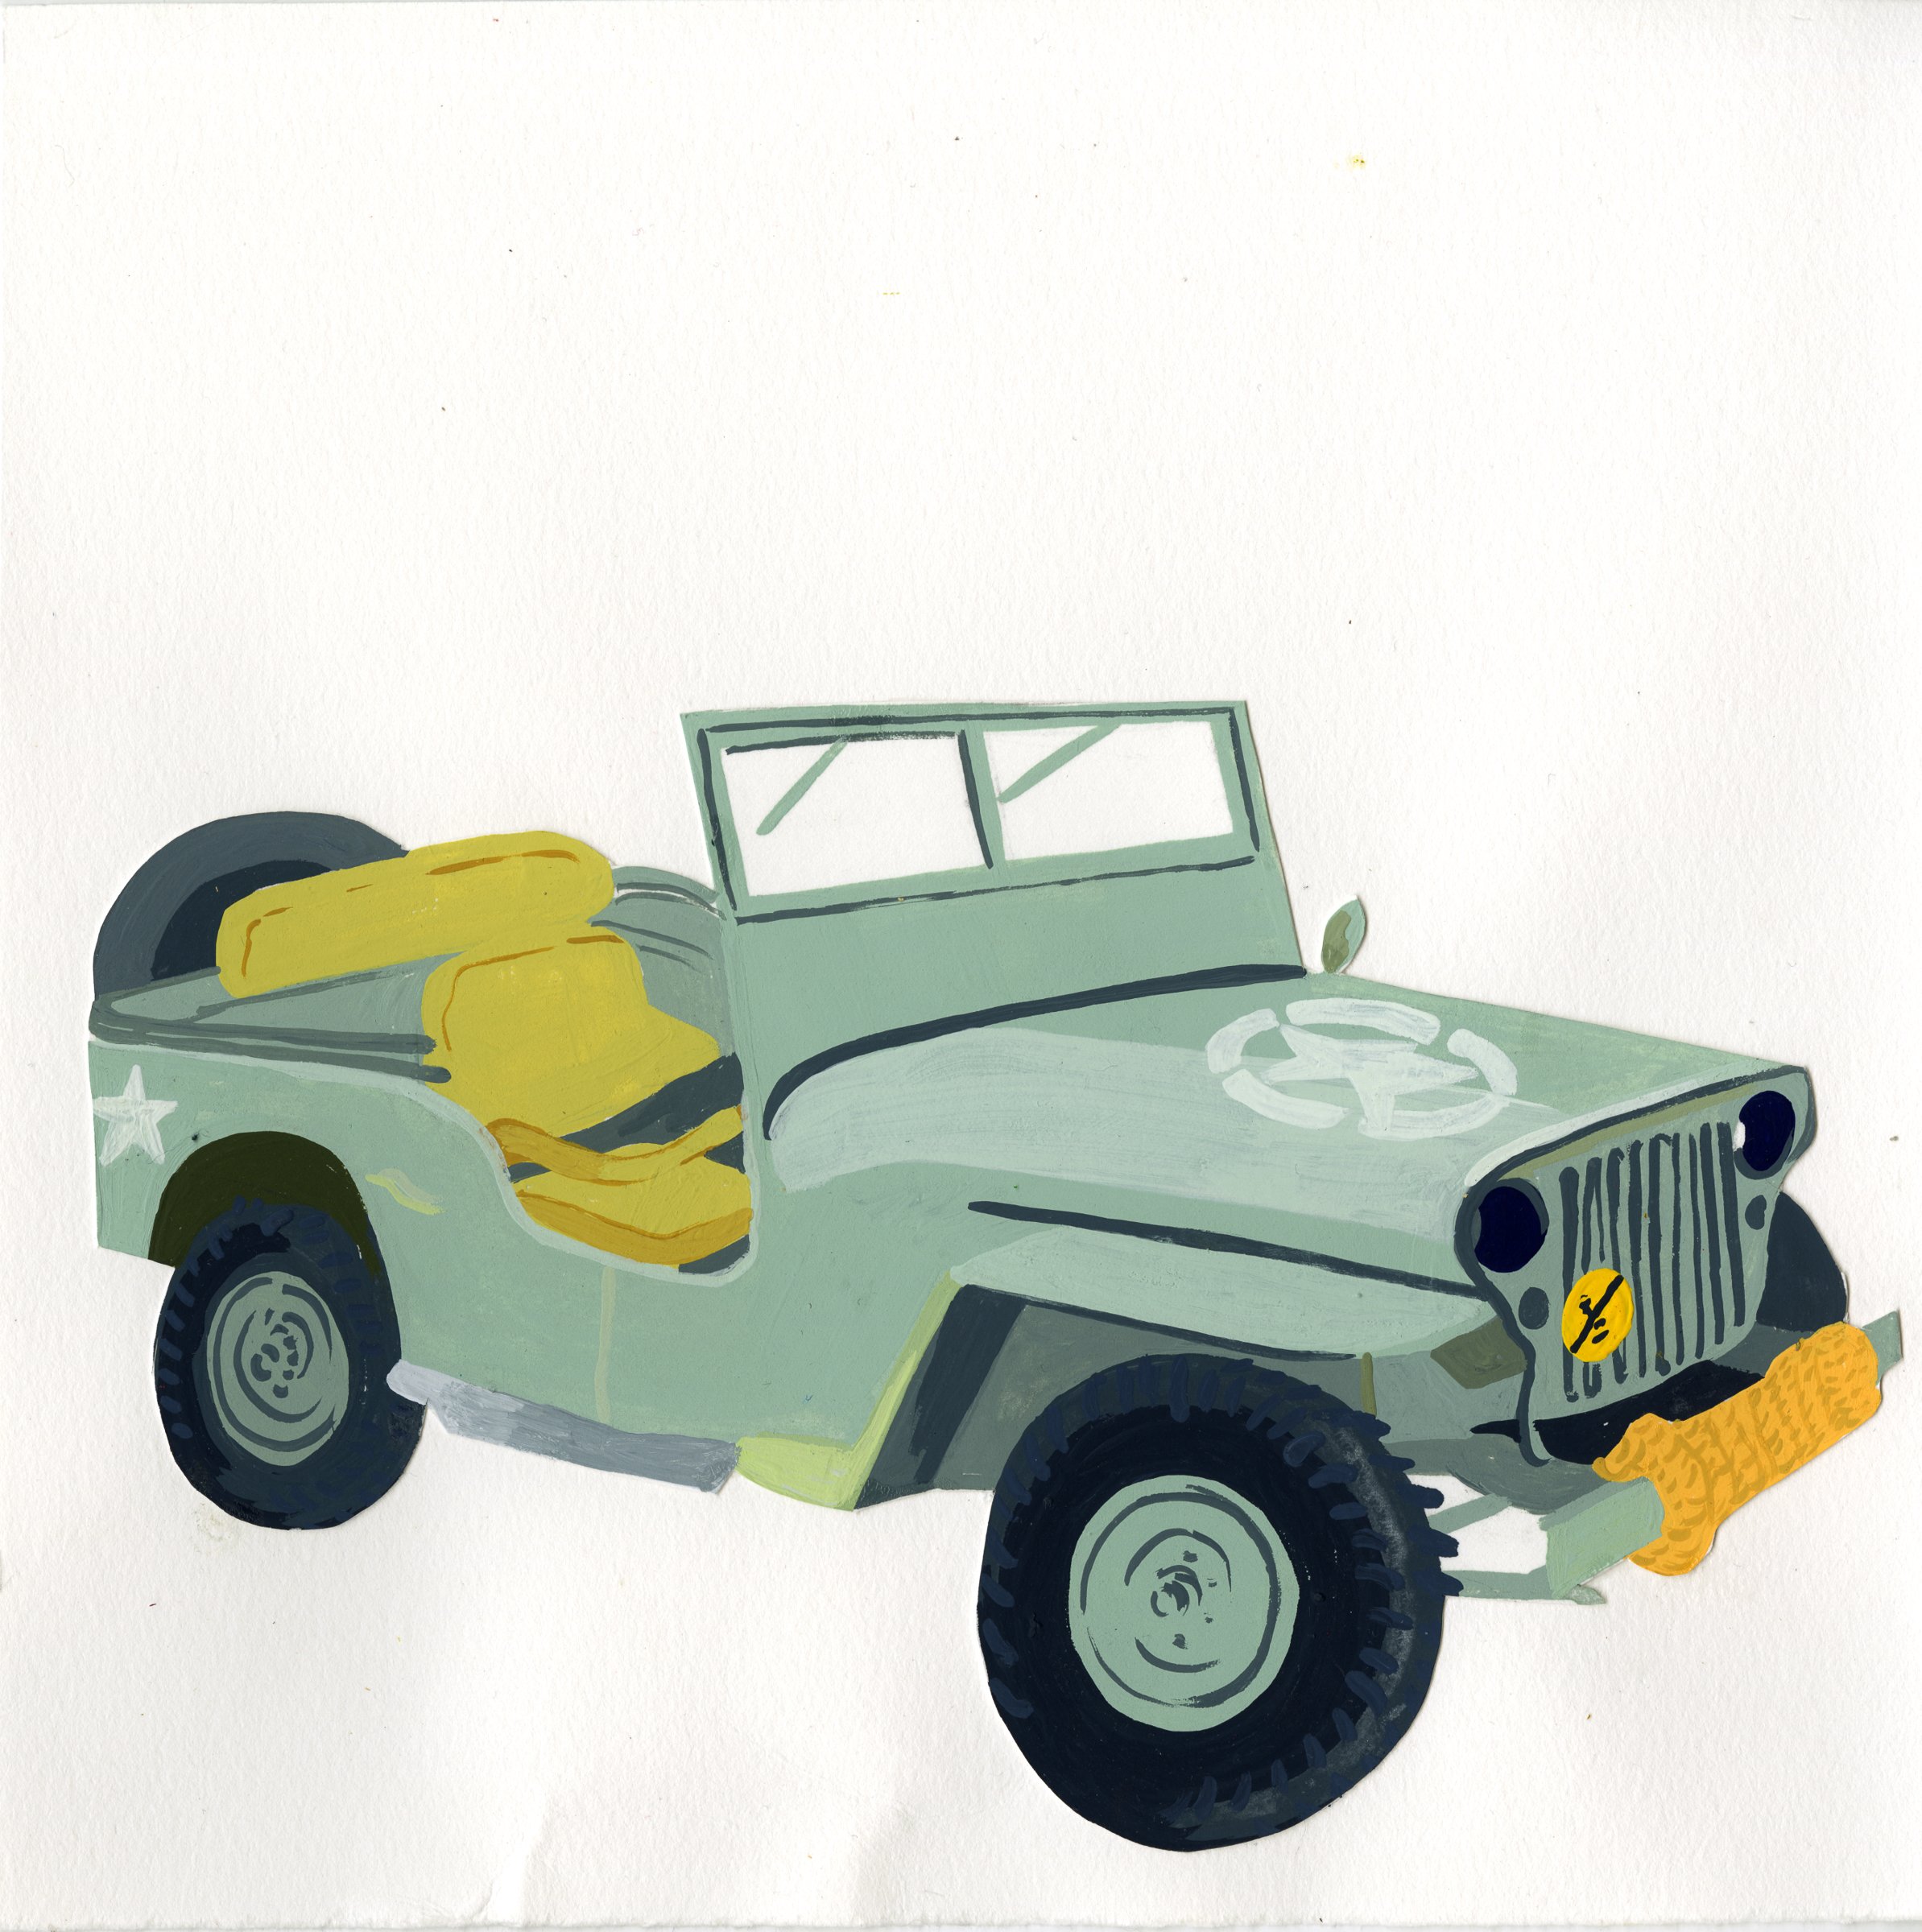 My Father’s Cars (Willys Jeep)